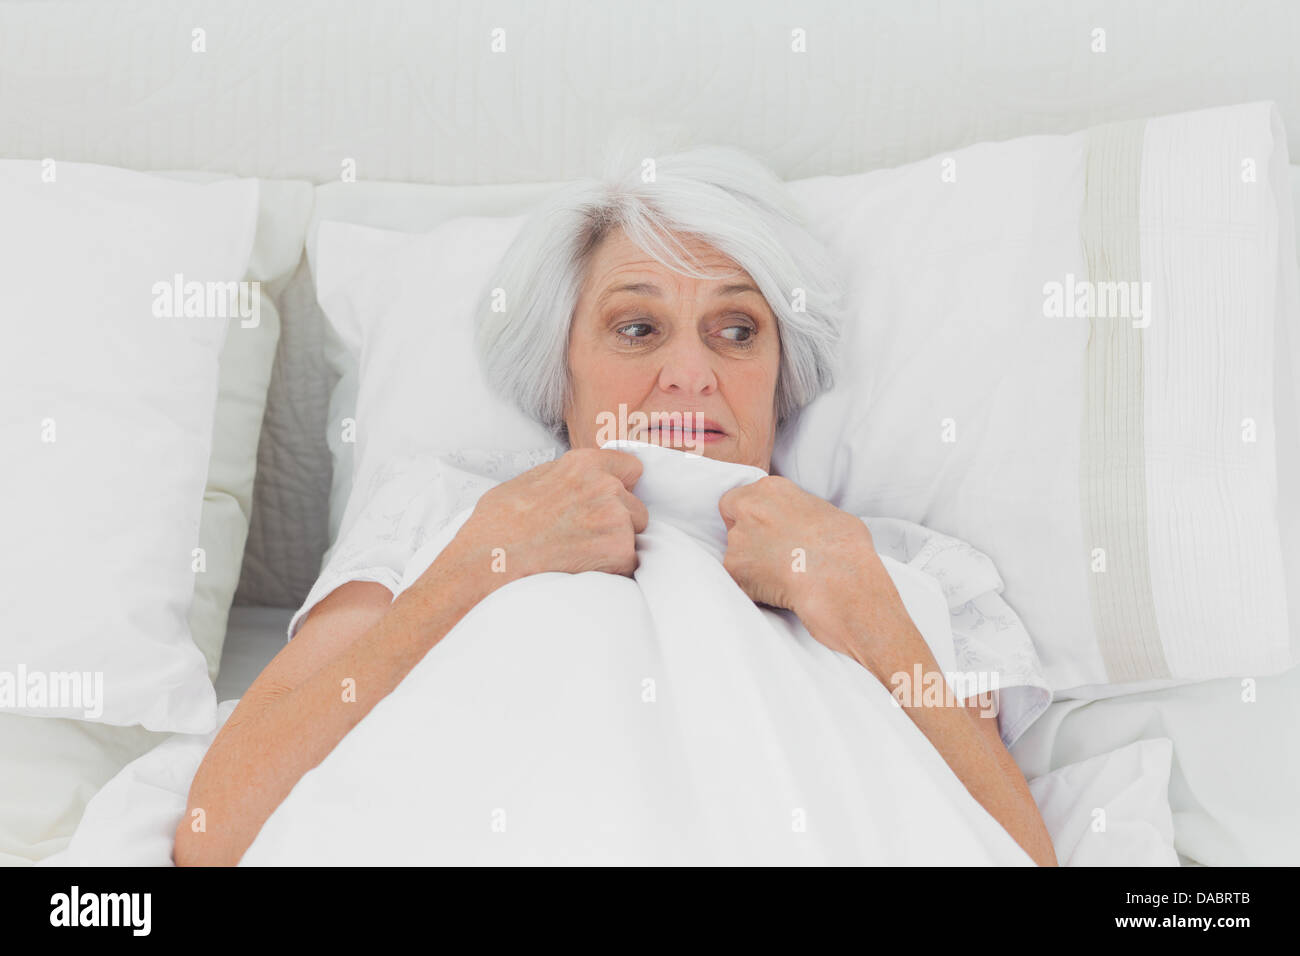 Fearful woman clutching her quilt Stock Photo